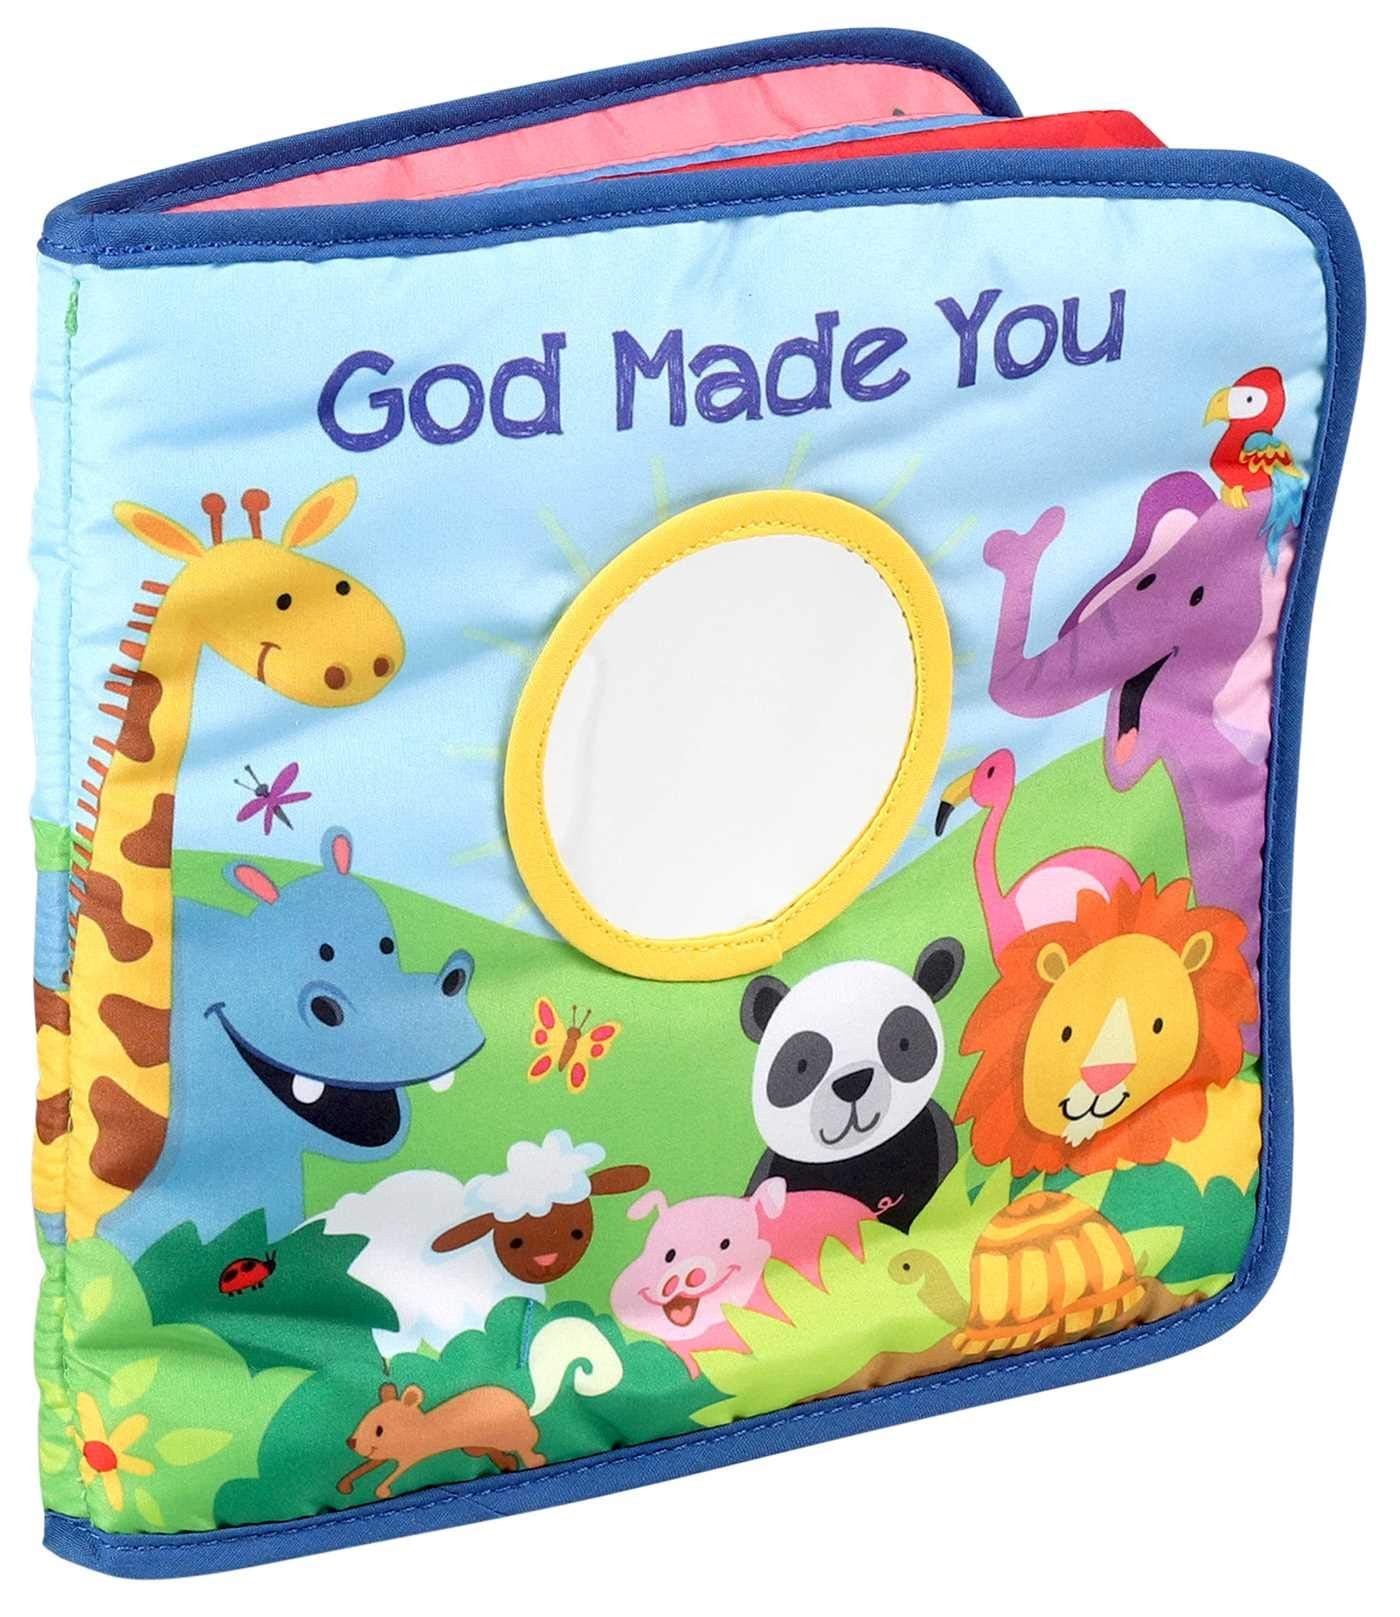 God Made You by Lori Froeb